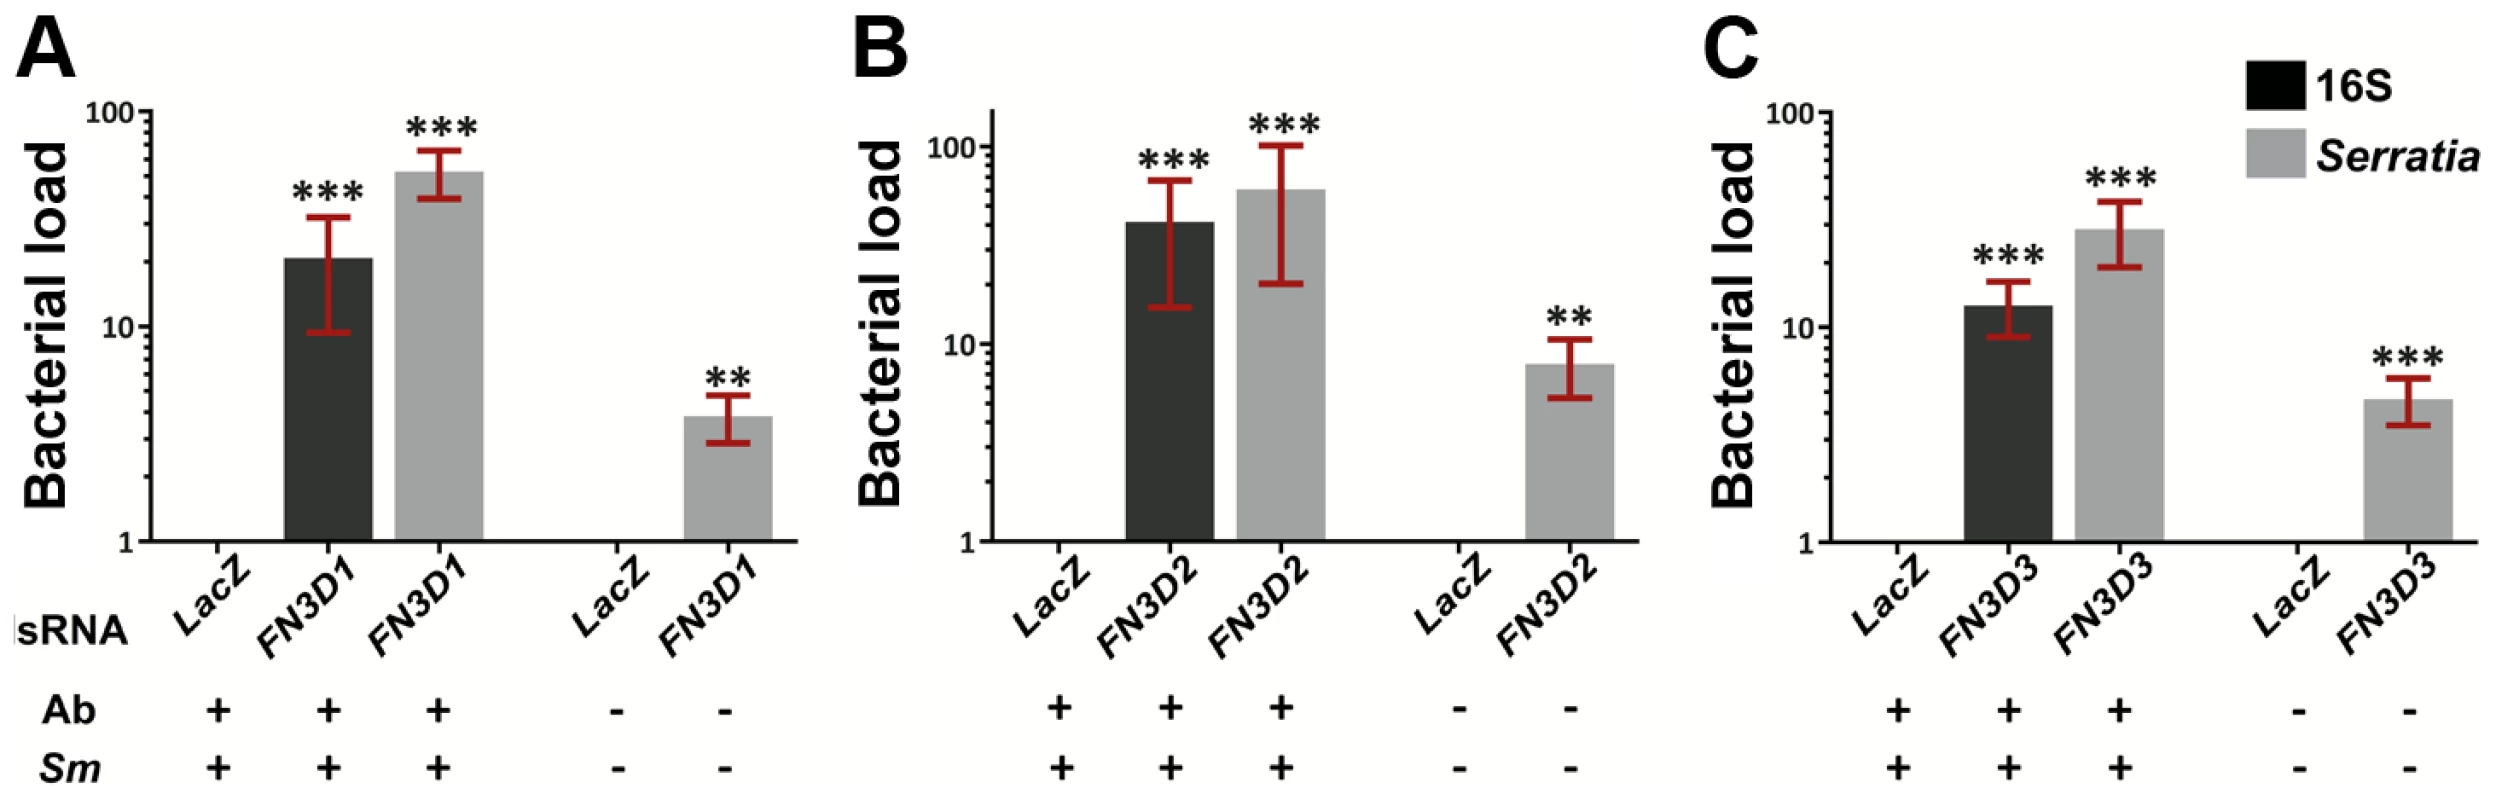 Silencing of <i>FN3D1–3</i> increases <i>Serratia</i> levels in orally infected mosquitoes or mosquitoes retaining their natural gut microbiota.